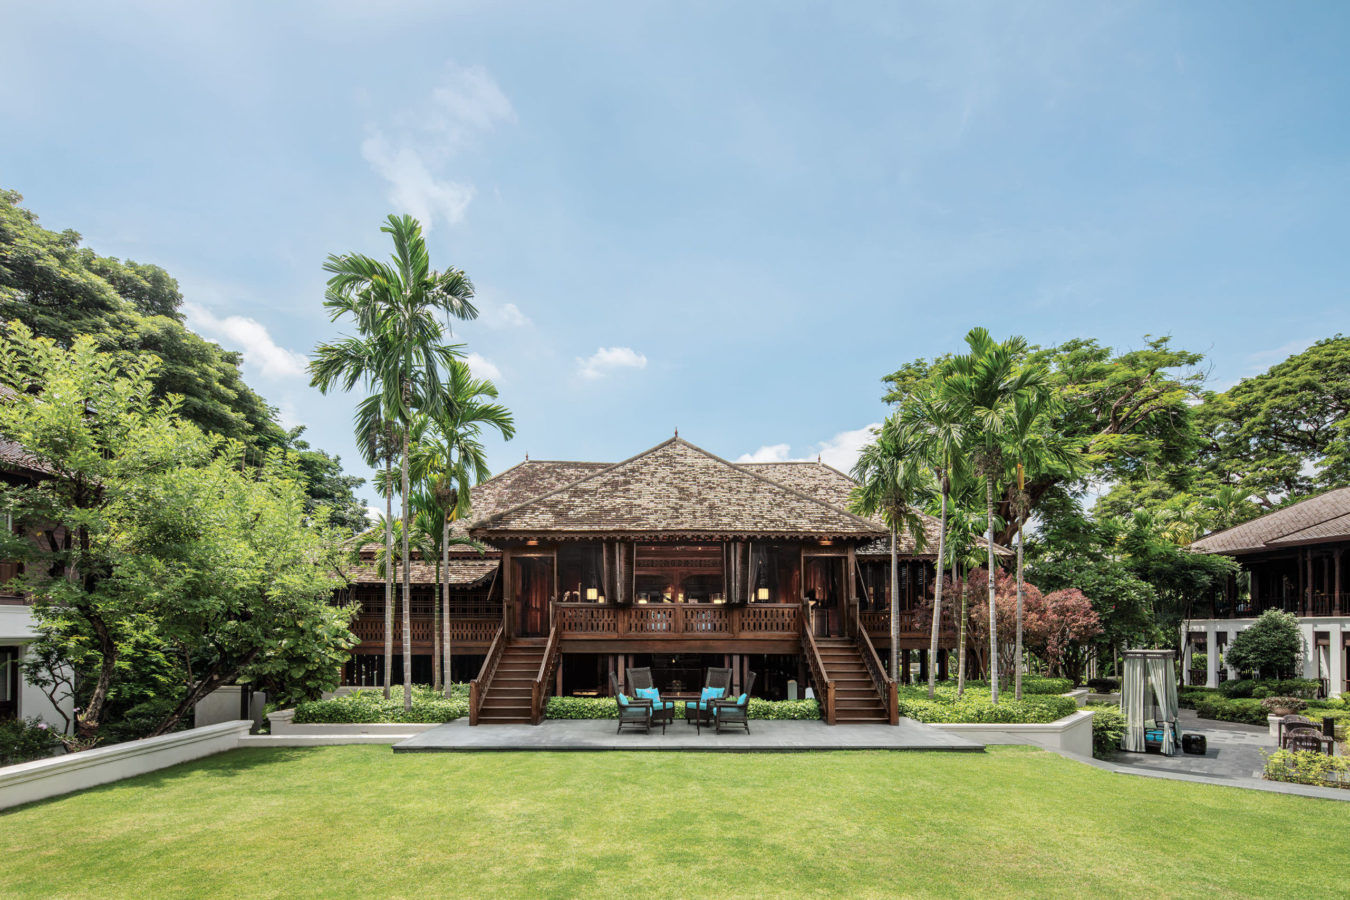 6 of Chiang Mai’s most beautiful heritage hotels